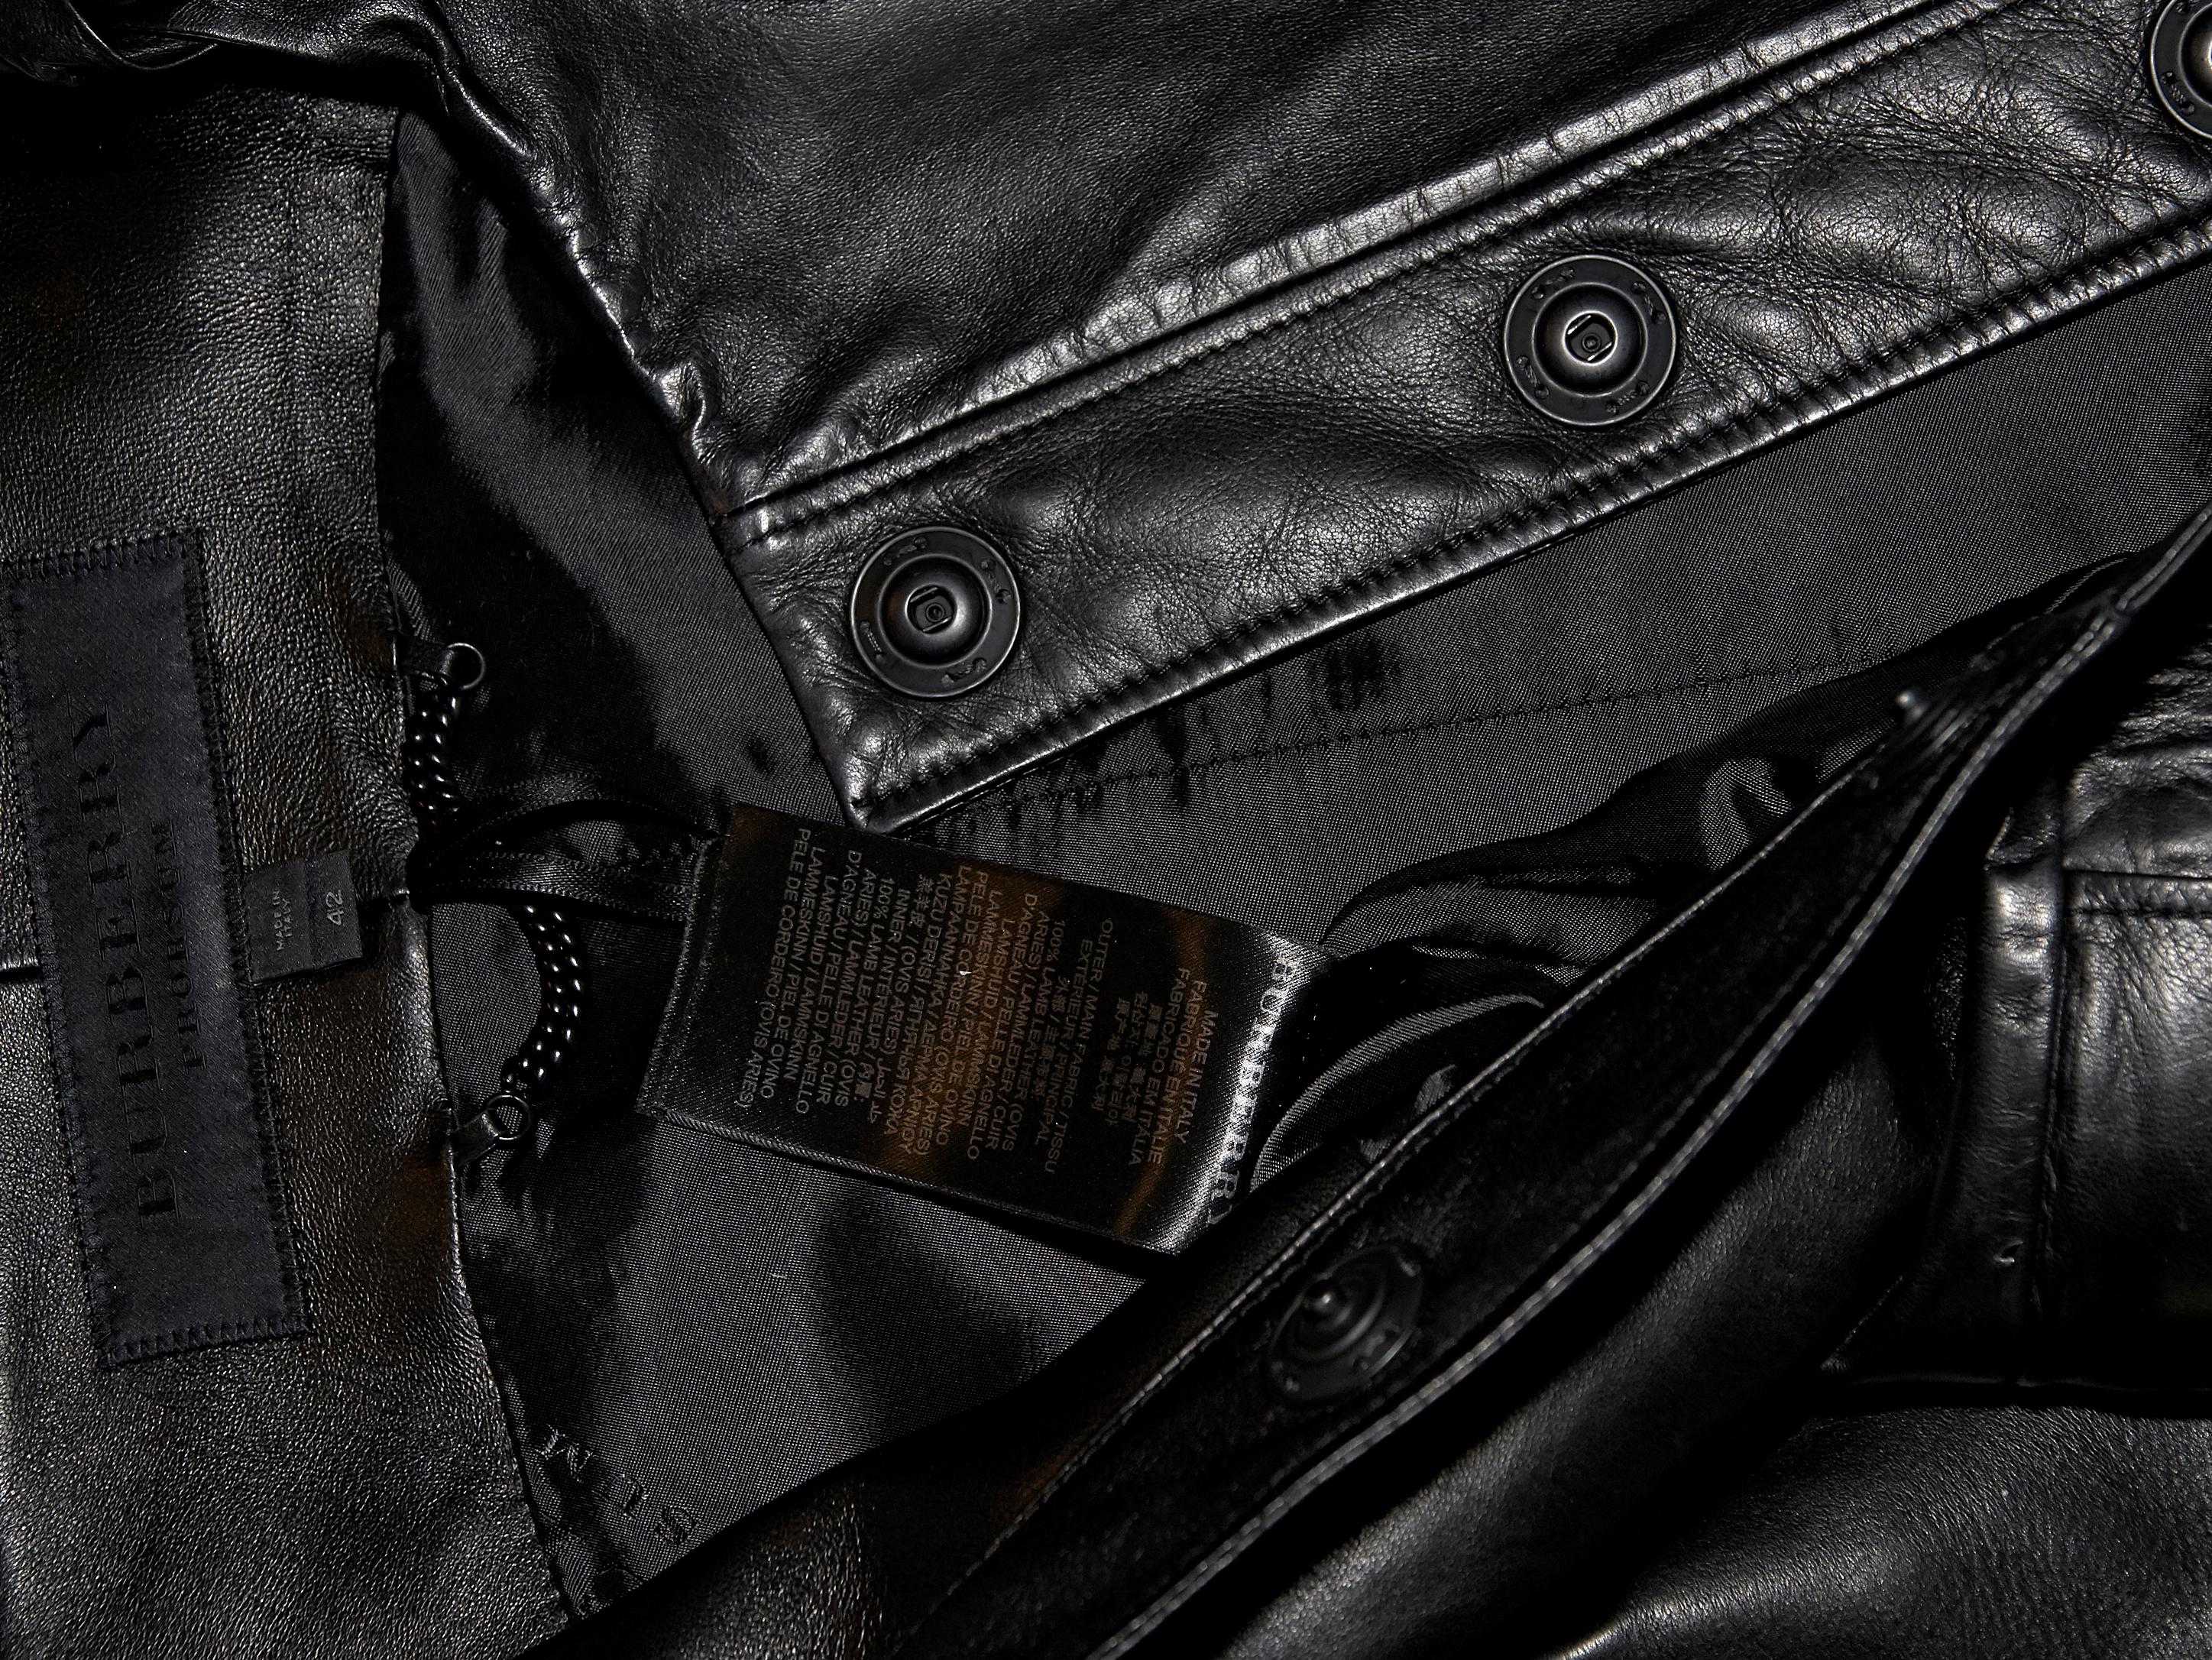 Black Burberry Prorsum Leather Jacket im Zustand „Gut“ in New York, NY